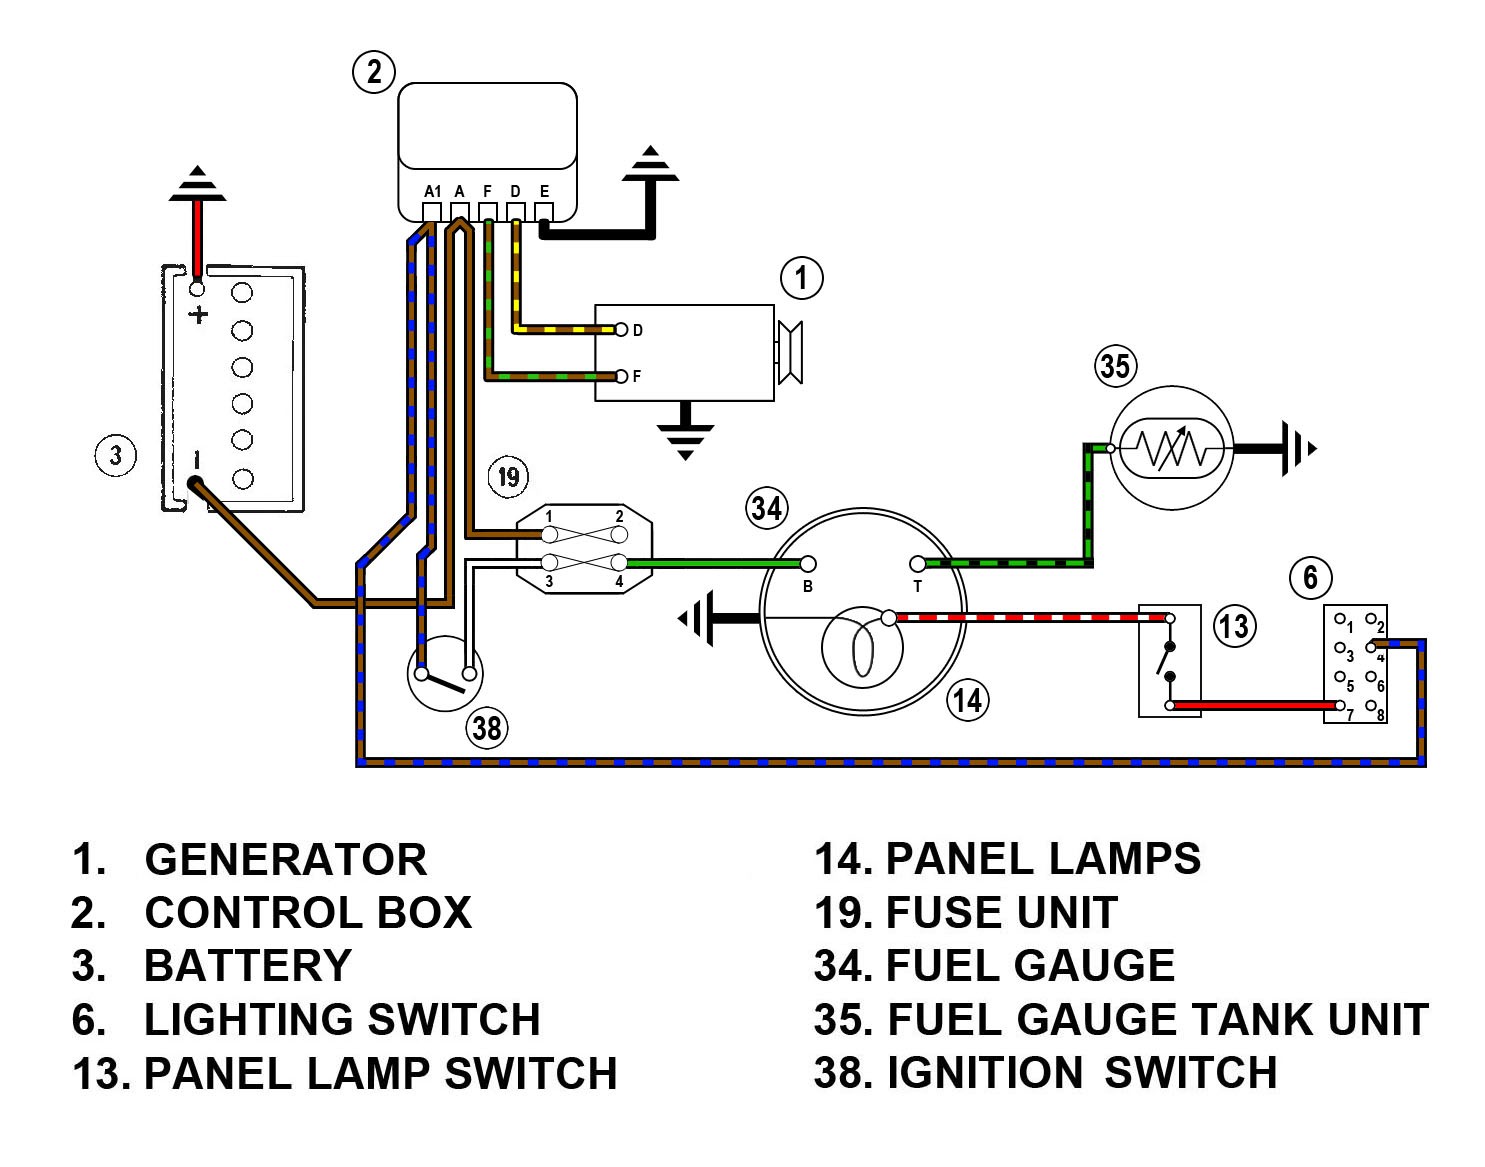 Gas Gauge Wiring Diagram How To Wire A Fuel Sending Unit For Air Extraordinary